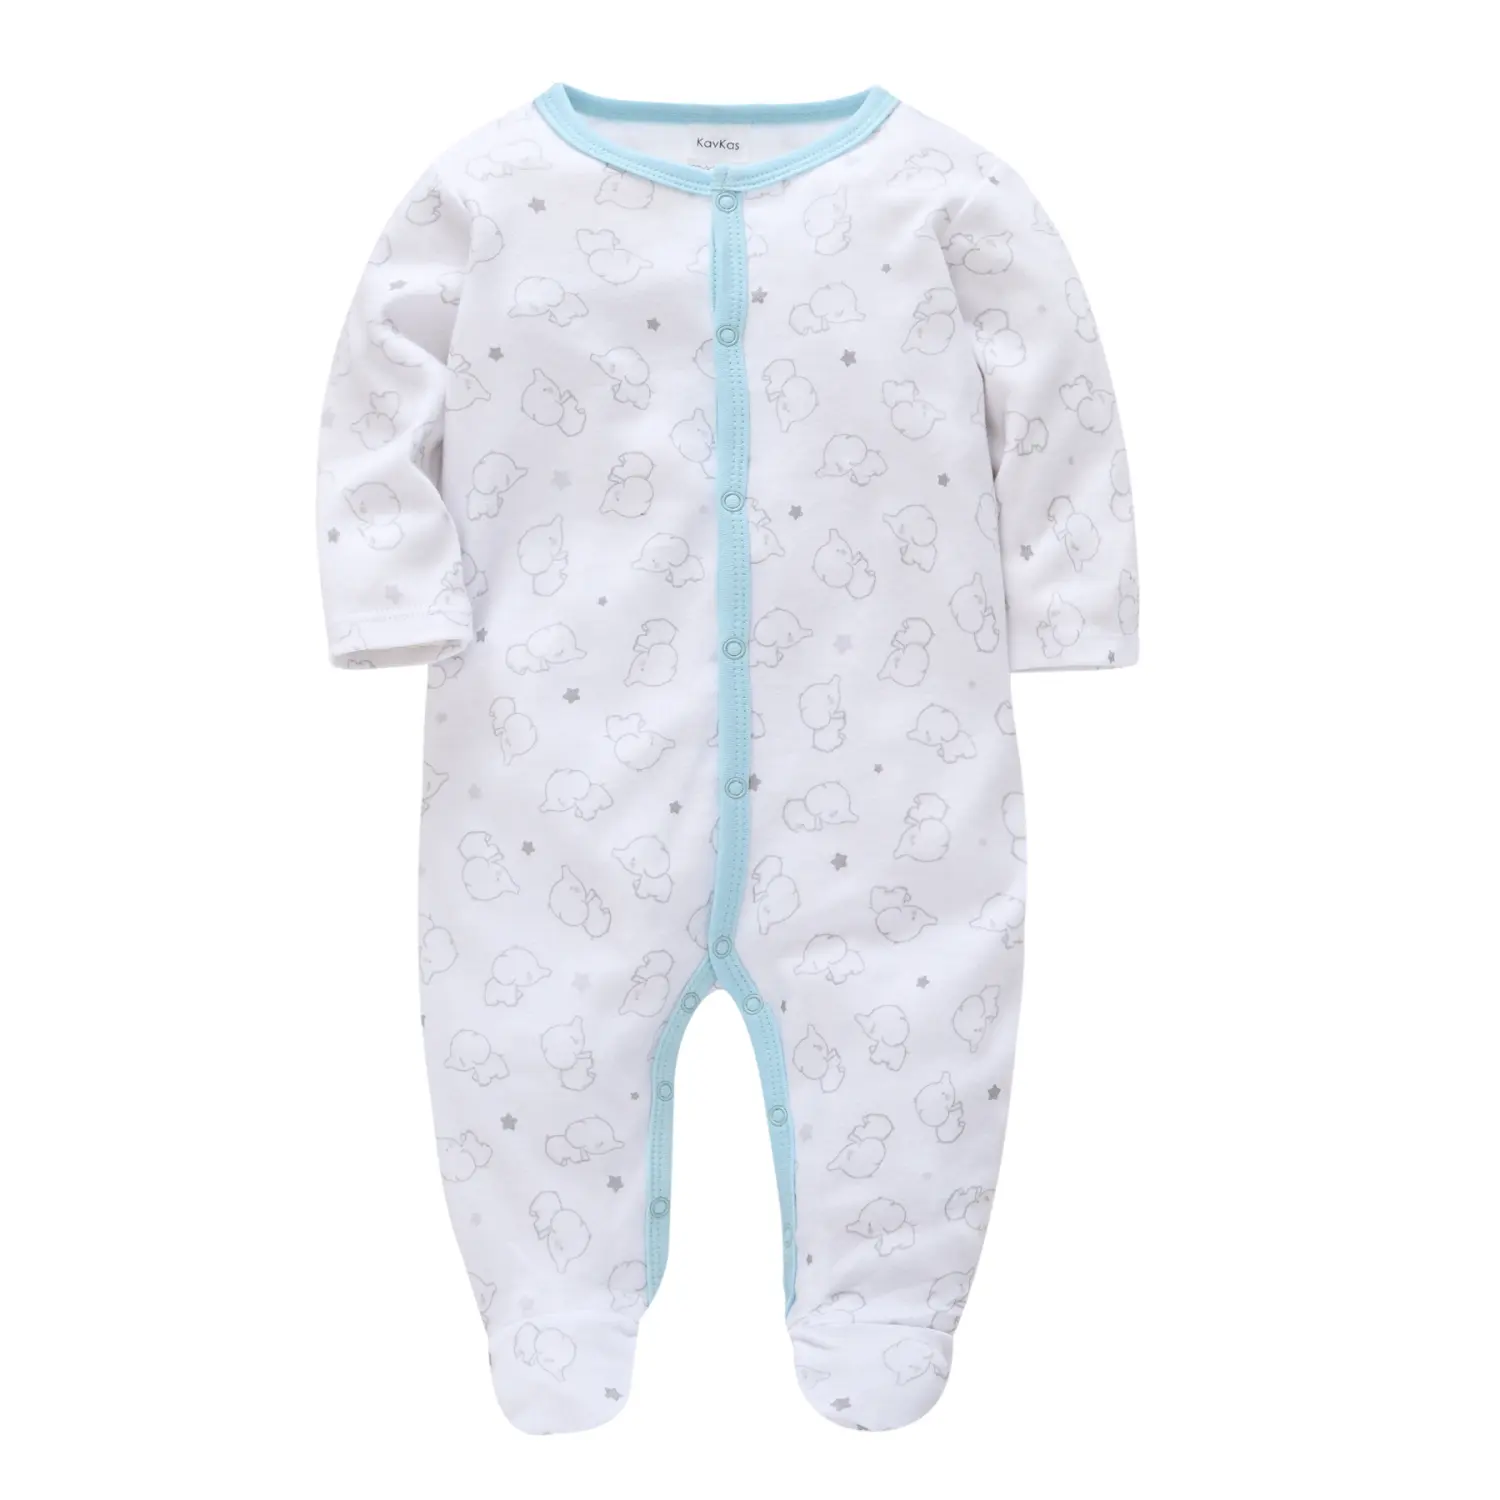 Hot Selling Baby Knitted Rompers Boys Cotton Overalls 0-3 Months Elephant Animal Printing Newborn Jumpsuit Infant Clothing